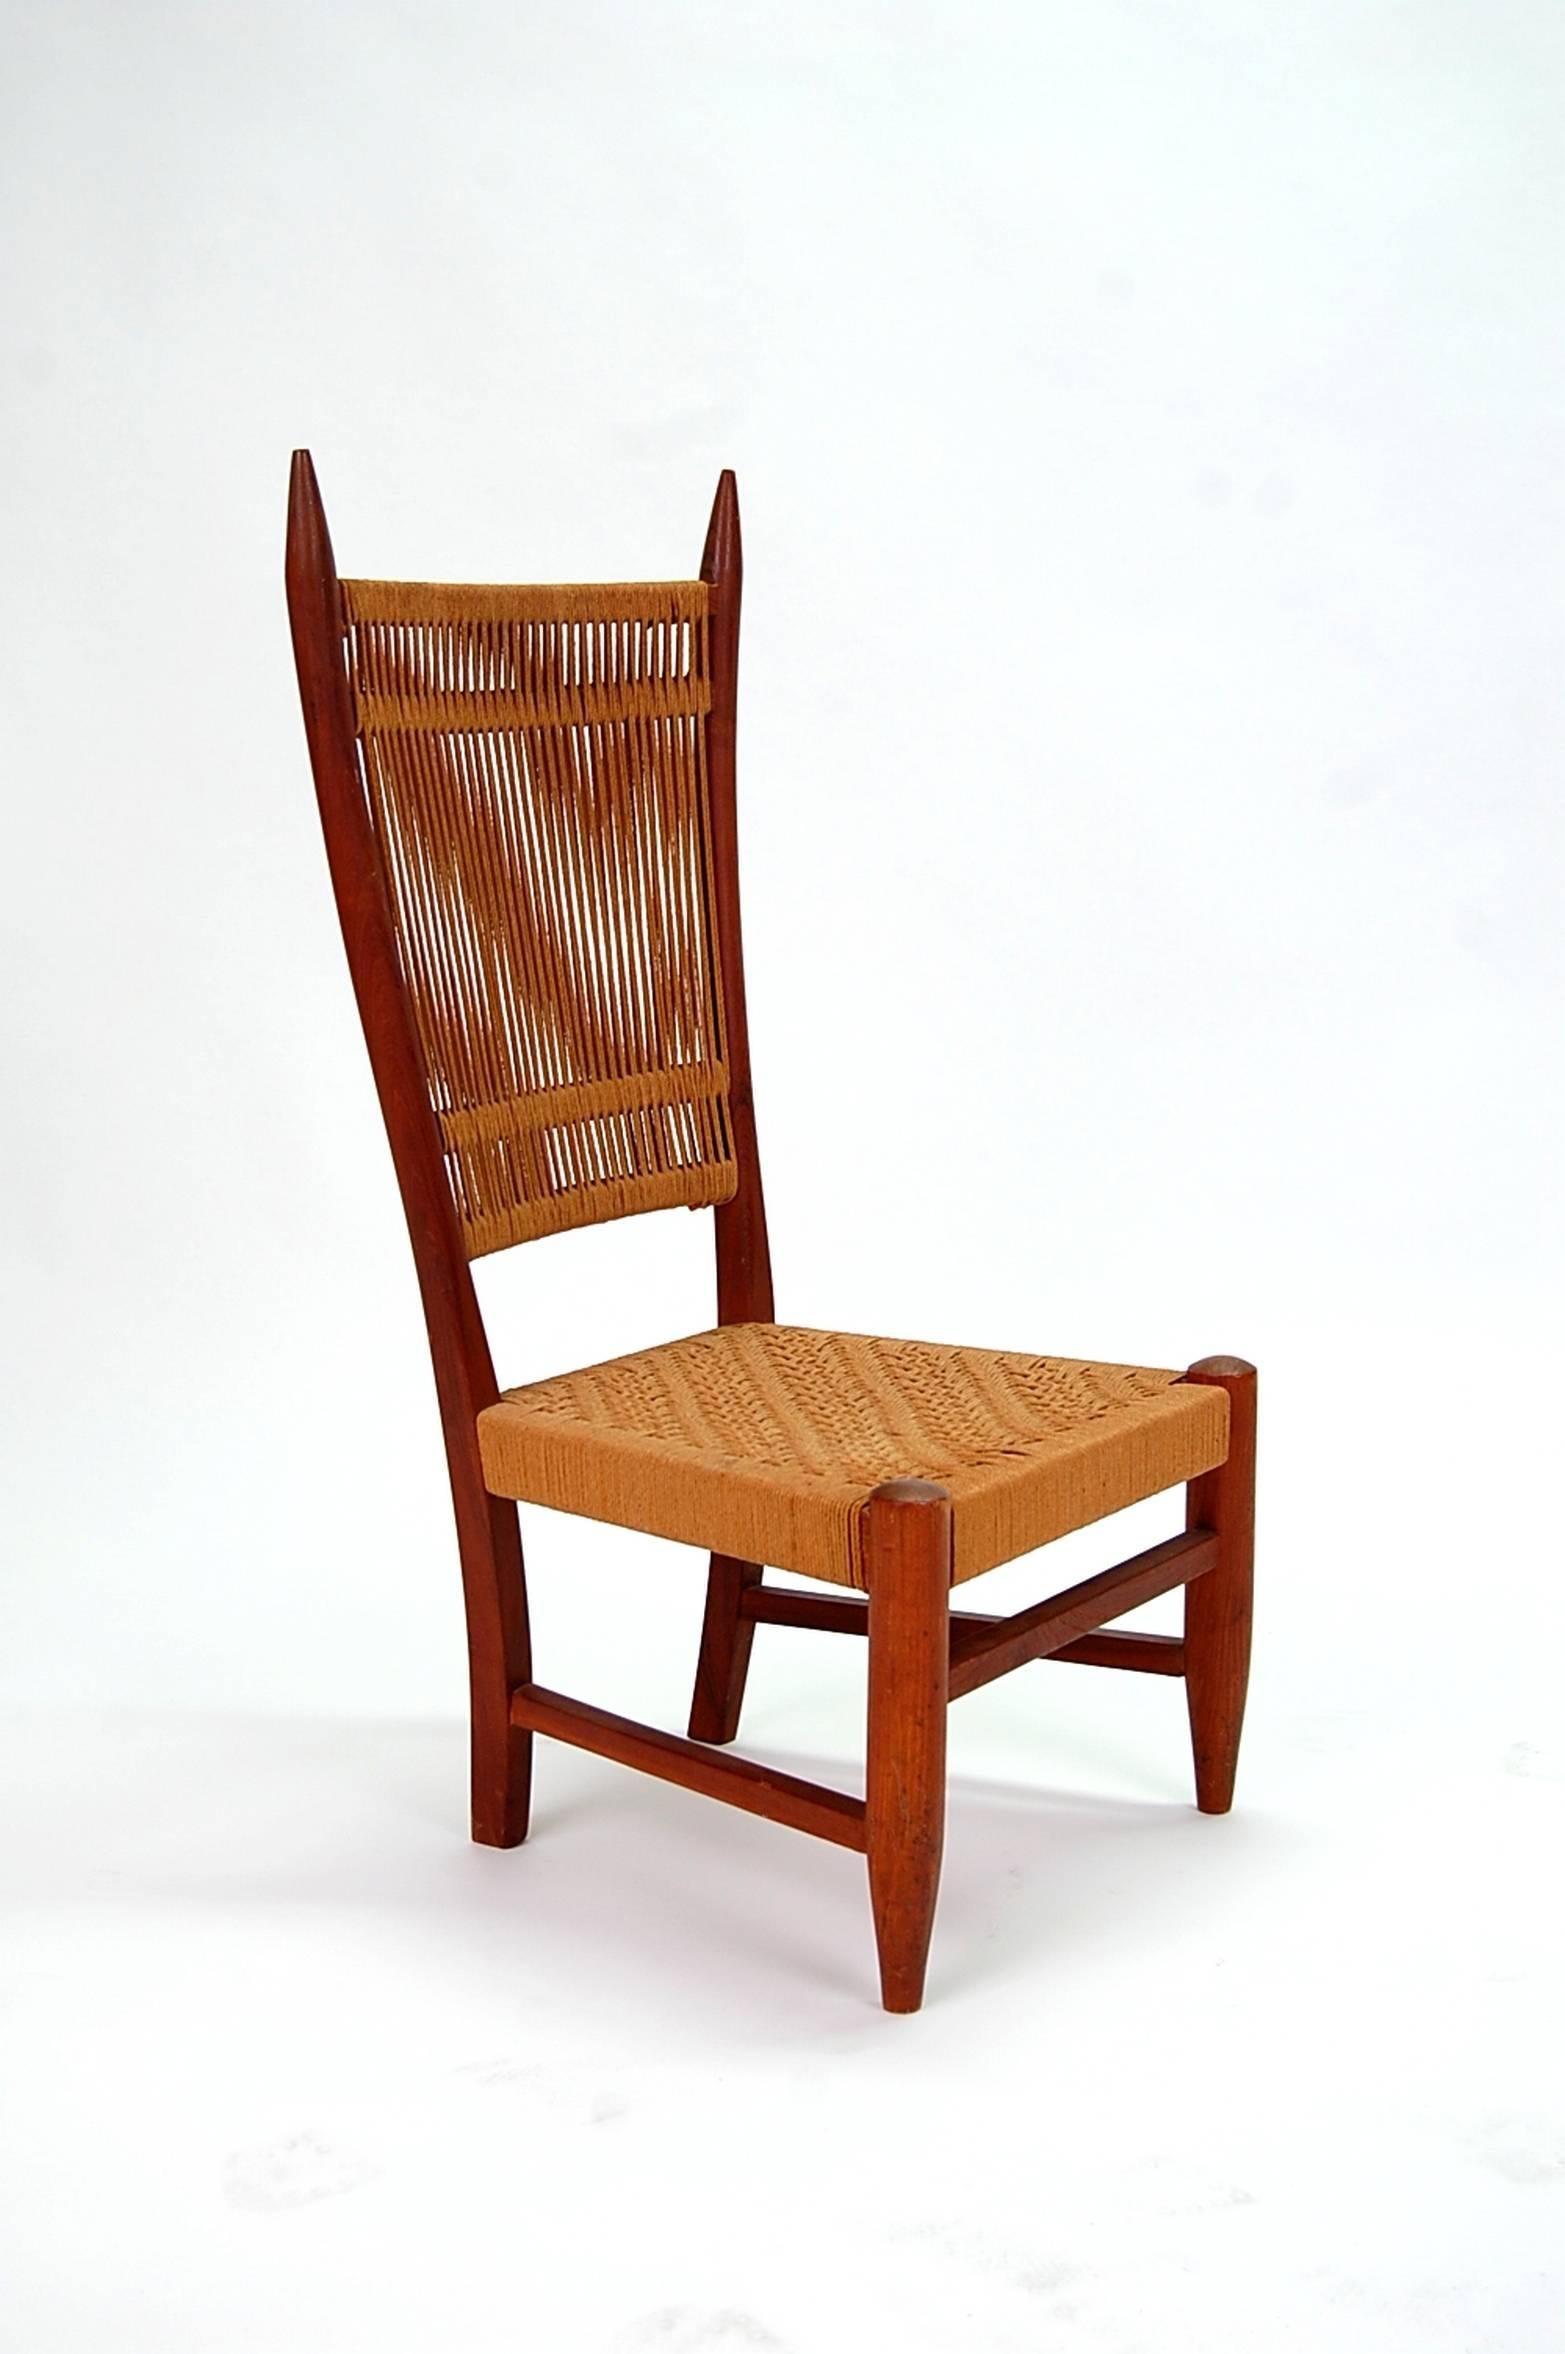 Diminutive Scandinavian chair in teak with string back and seat, circa 1960s.

We offer free delivery on most of our items within the Long Island or greater NYC, Northern New Jersey, and all of New England. Please inquire for further details. We